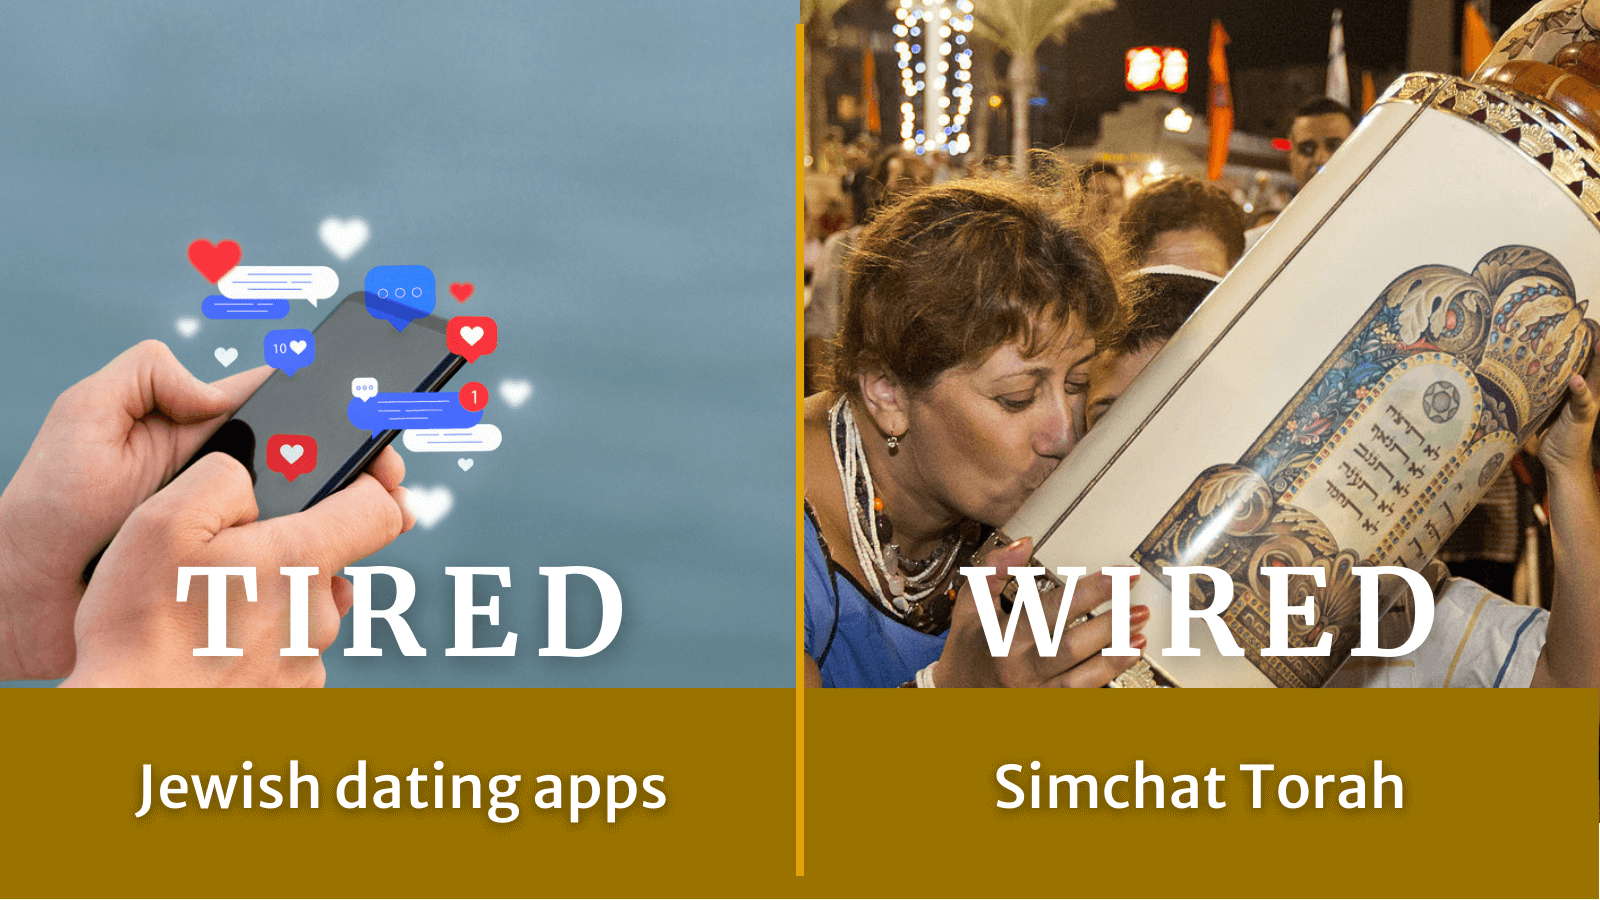 Tired: Jewish dating apps. Wired: Simchat Torah